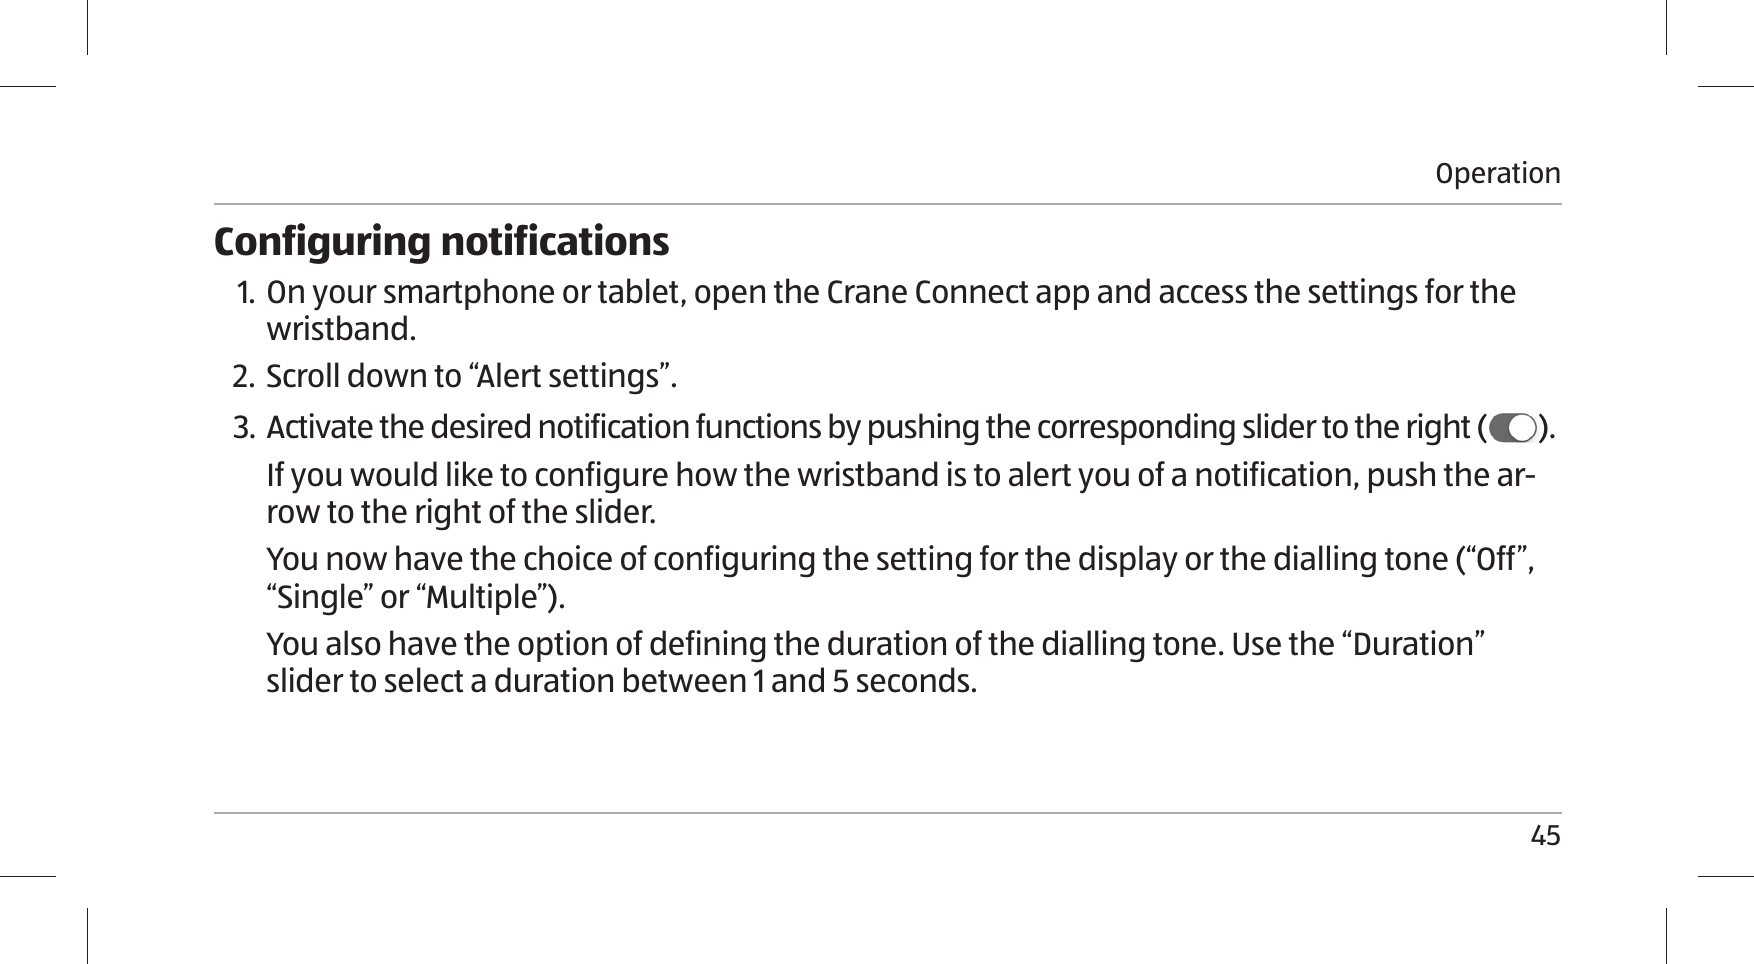 Operation45Configuring notifications1. On your smartphone or tablet, open the Crane Connect app and access the settings for the wristband.2. Scroll down to “Alert settings”.3. Activate the desired notification functions by pushing the corresponding slider to the right ( ).If you would like to configure how the wristband is to alert you of a notification, push the ar-row to the right of the slider. You now have the choice of configuring the setting for the display or the dialling tone (“Off”, “Single” or “Multiple”).You also have the option of defining the duration of the dialling tone. Use the “Duration”  slider to select a duration between 1 and 5 seconds.